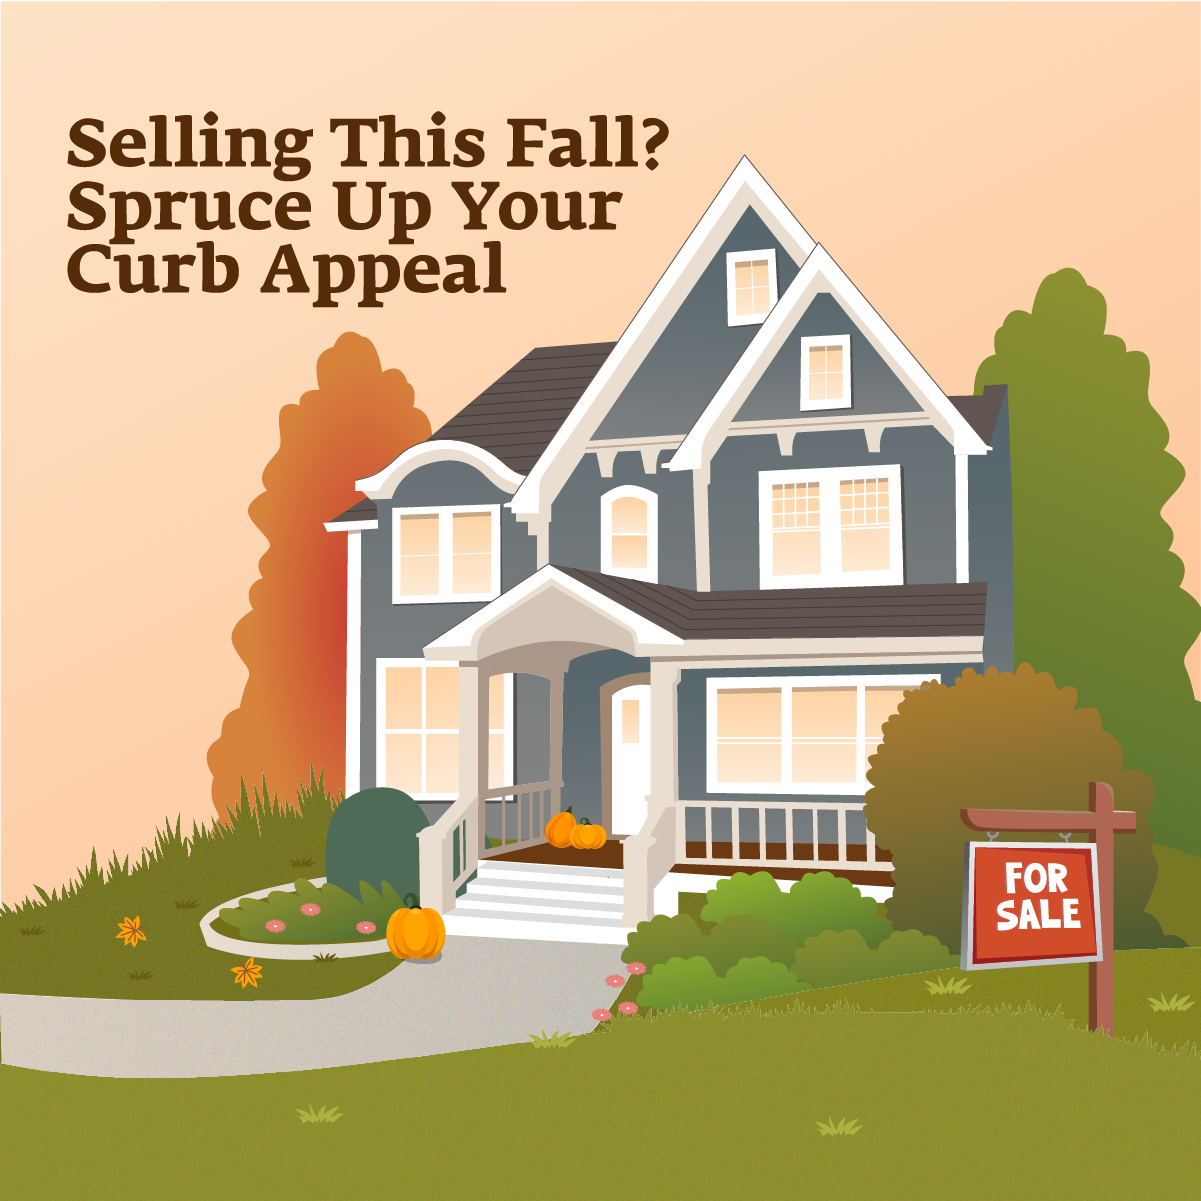 Selling this Fall? Spruce up your curb appeal.